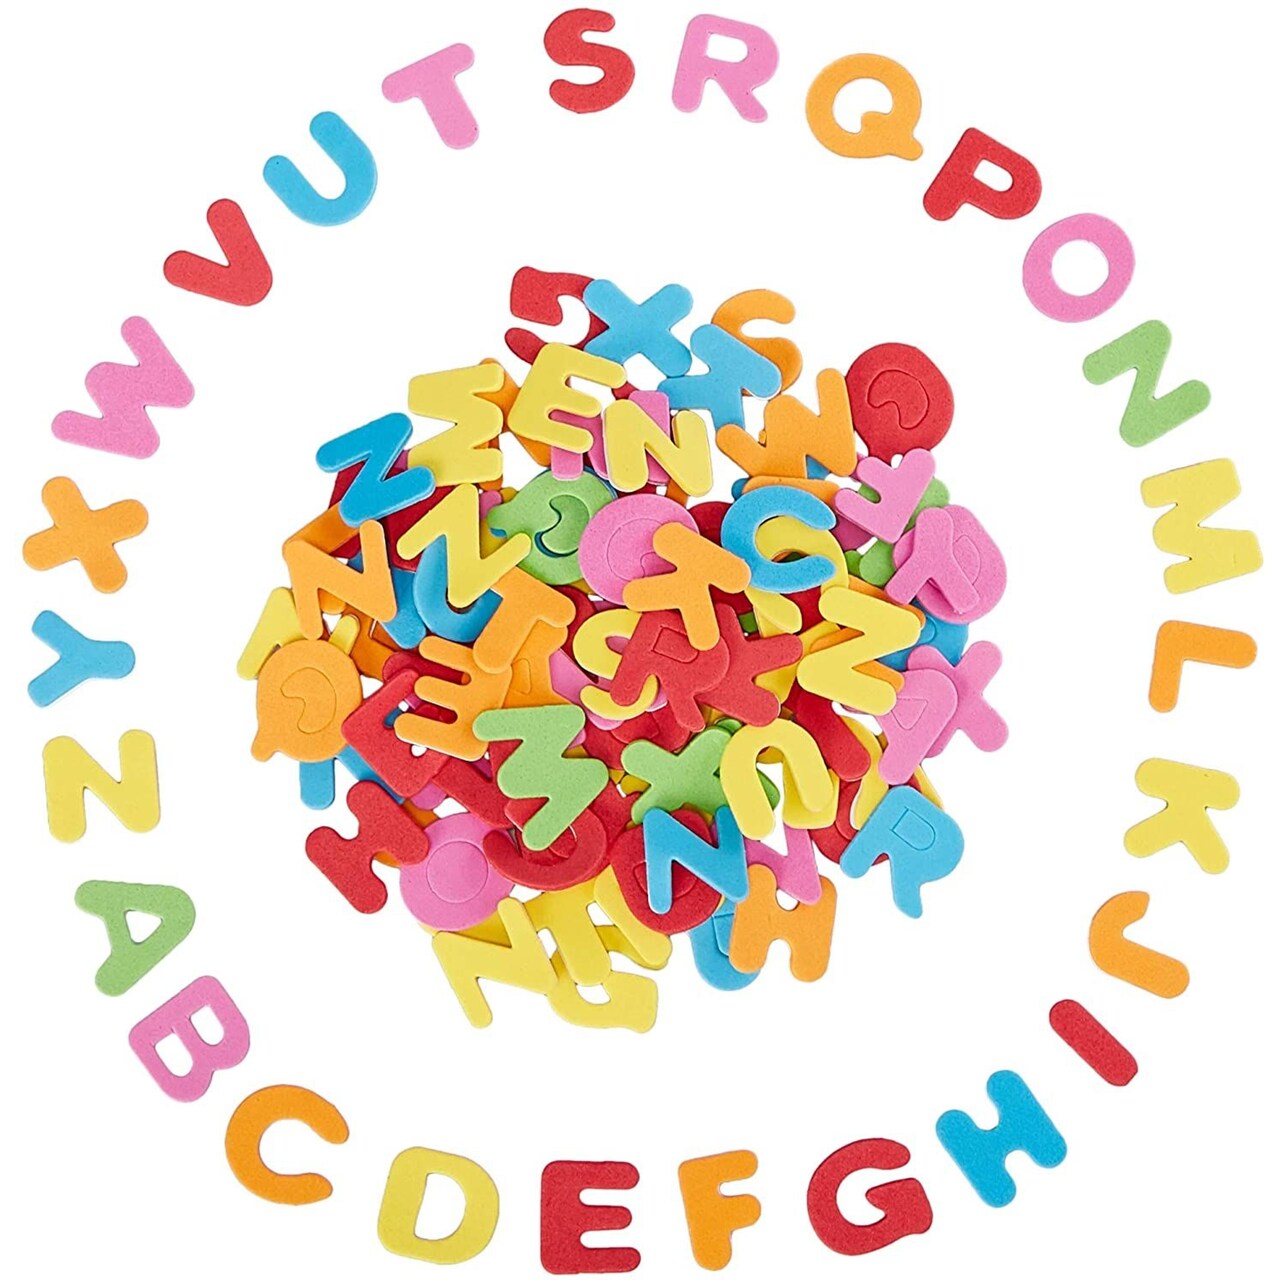 1300 Pieces Small Foam Letters Stickers for Crafts, 50 Sets of 0.87  Self-Adhesive A-Z Alphabet Letters (6 Assorted Colors)